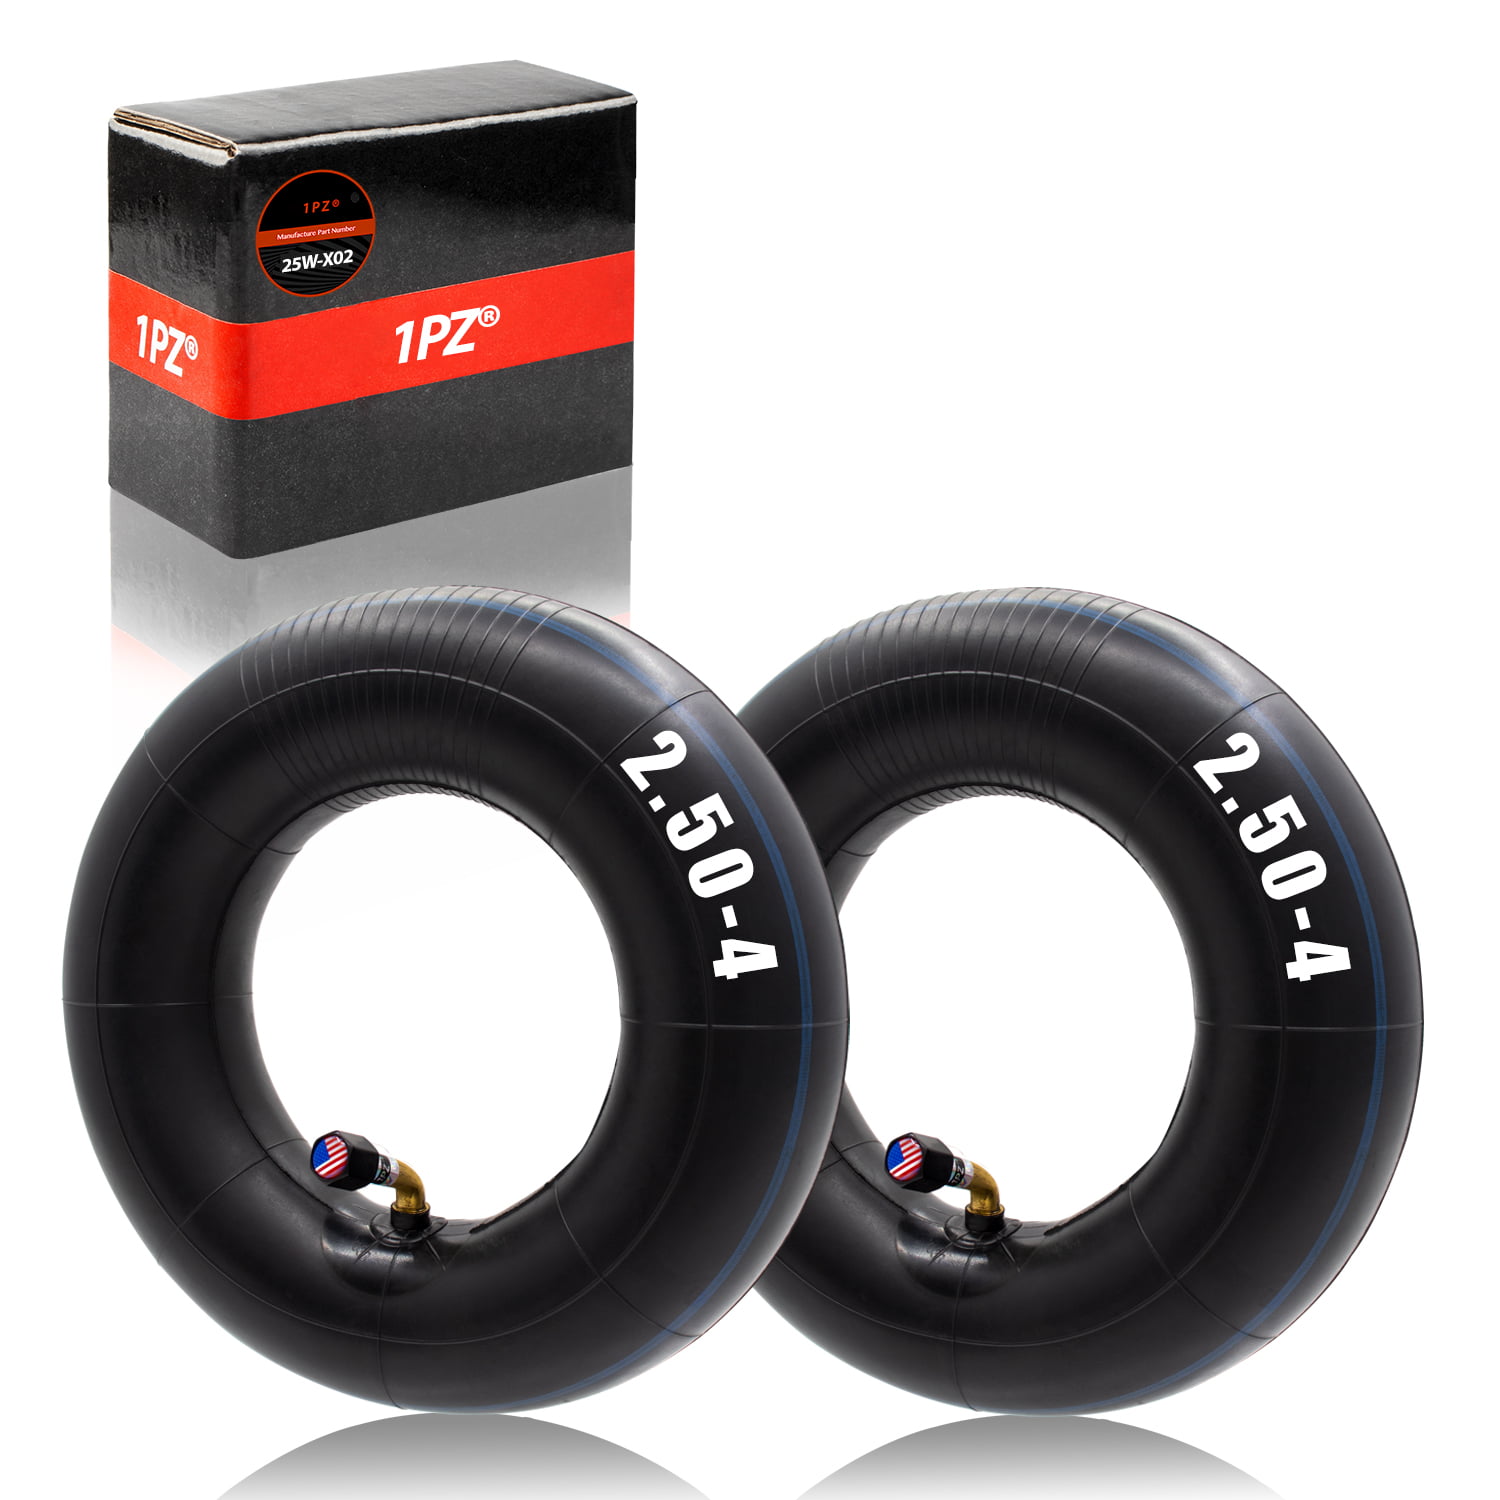 260x85 Two 3.00-4 10" x 3" Inner Tube Gas Electric Scooter Pocket Bike Tires 